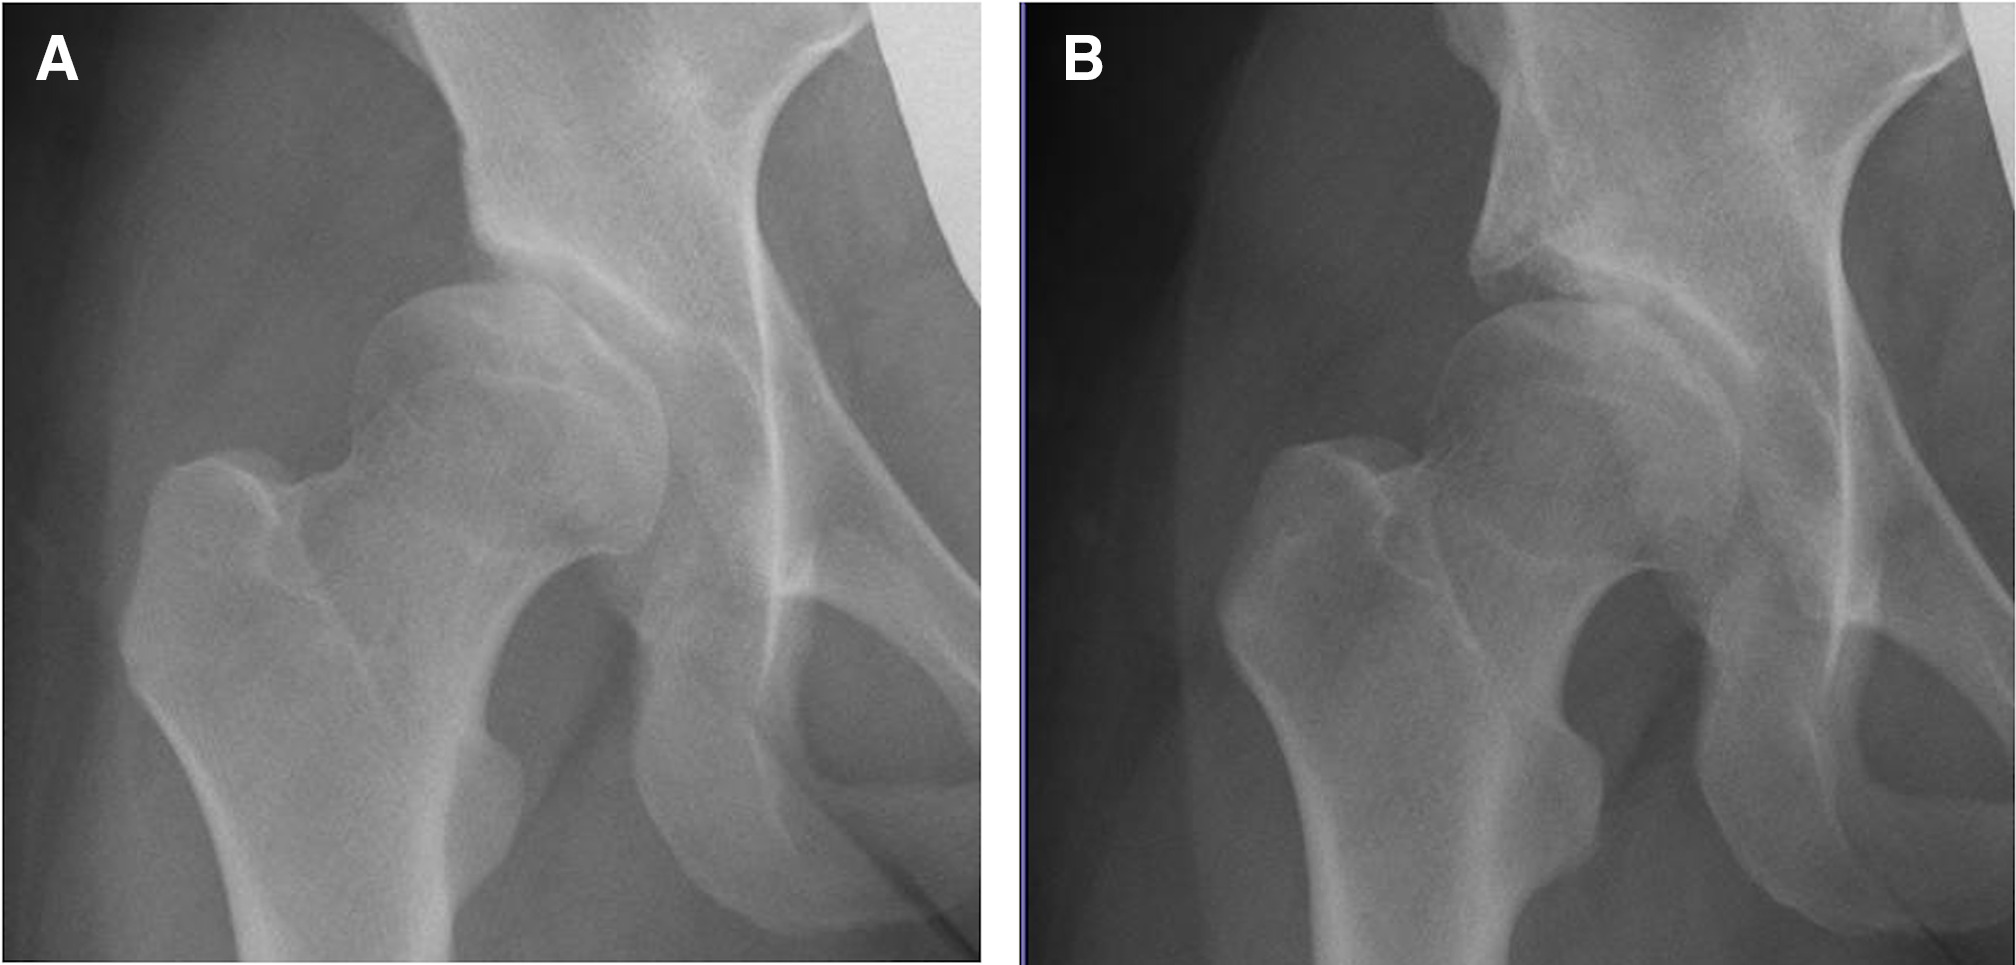 Fig. 3 
            Radiographs of a 23-year-old female who had undergone a modified Spitzy shelf acetabuloplasty on the right hip: a) preoperatively, osteoarthritis Tönnis grade 0, a lateral centre-edge angle of 9° (Merle d’Aubigné clinical score, 14 points), and b) at ten years postoperatively, no osteoarthritis changes, a lateral centre-edge angle of 37° (Merle d’Aubigné clinical score, 18 points).
          